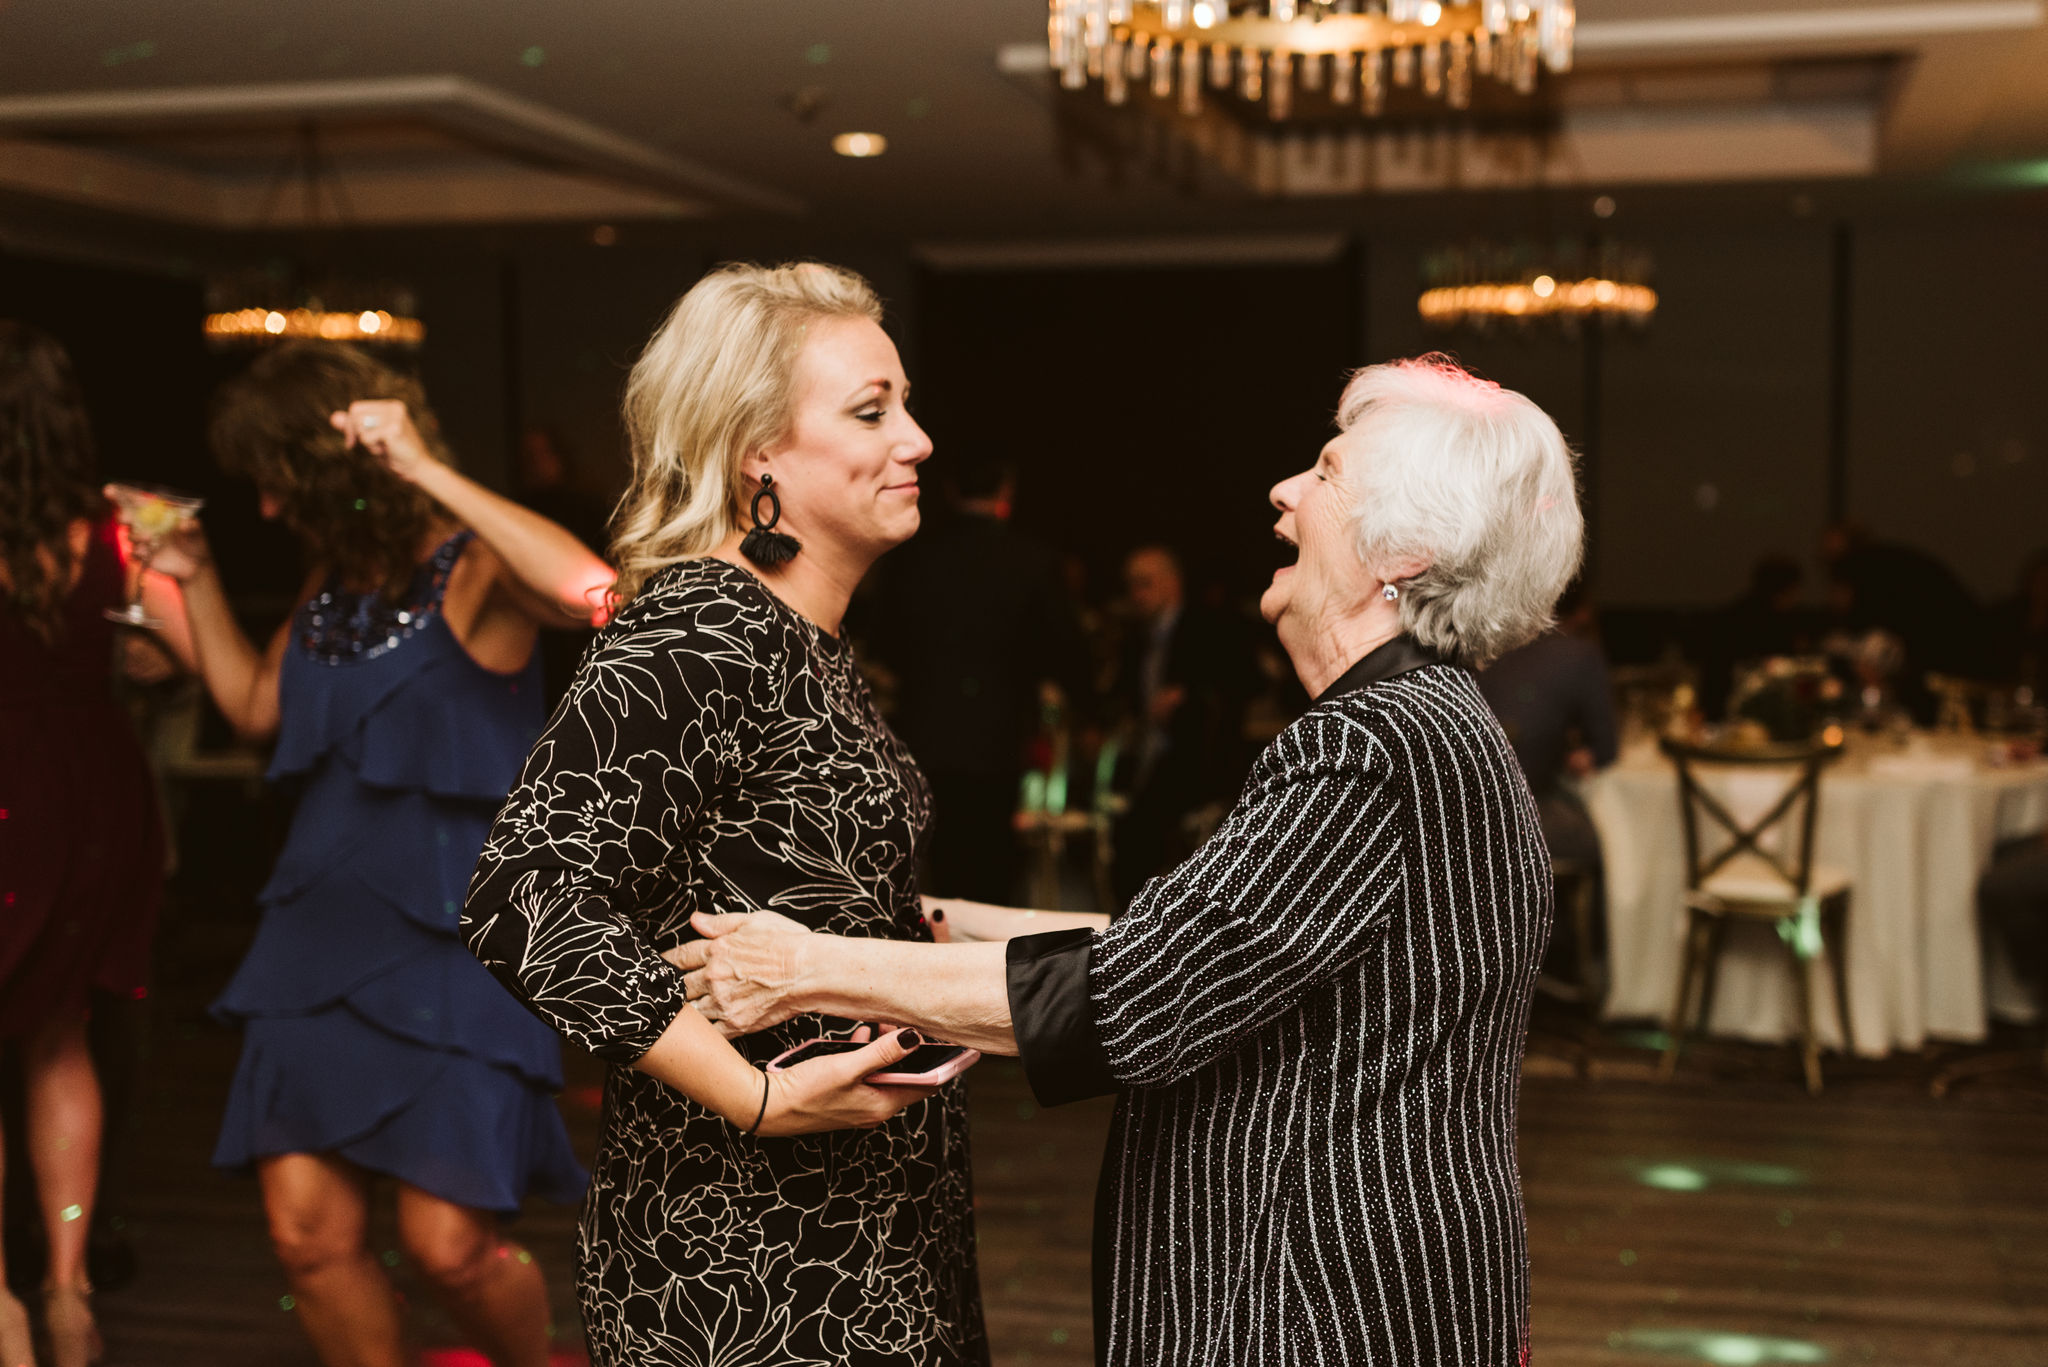  Phoenix Maryland, Baltimore Wedding Photographer, Eagle’s Nest Country Club, Classic, Romantic, Wedding Guests Laughing Together on Dancefloor at Reception 